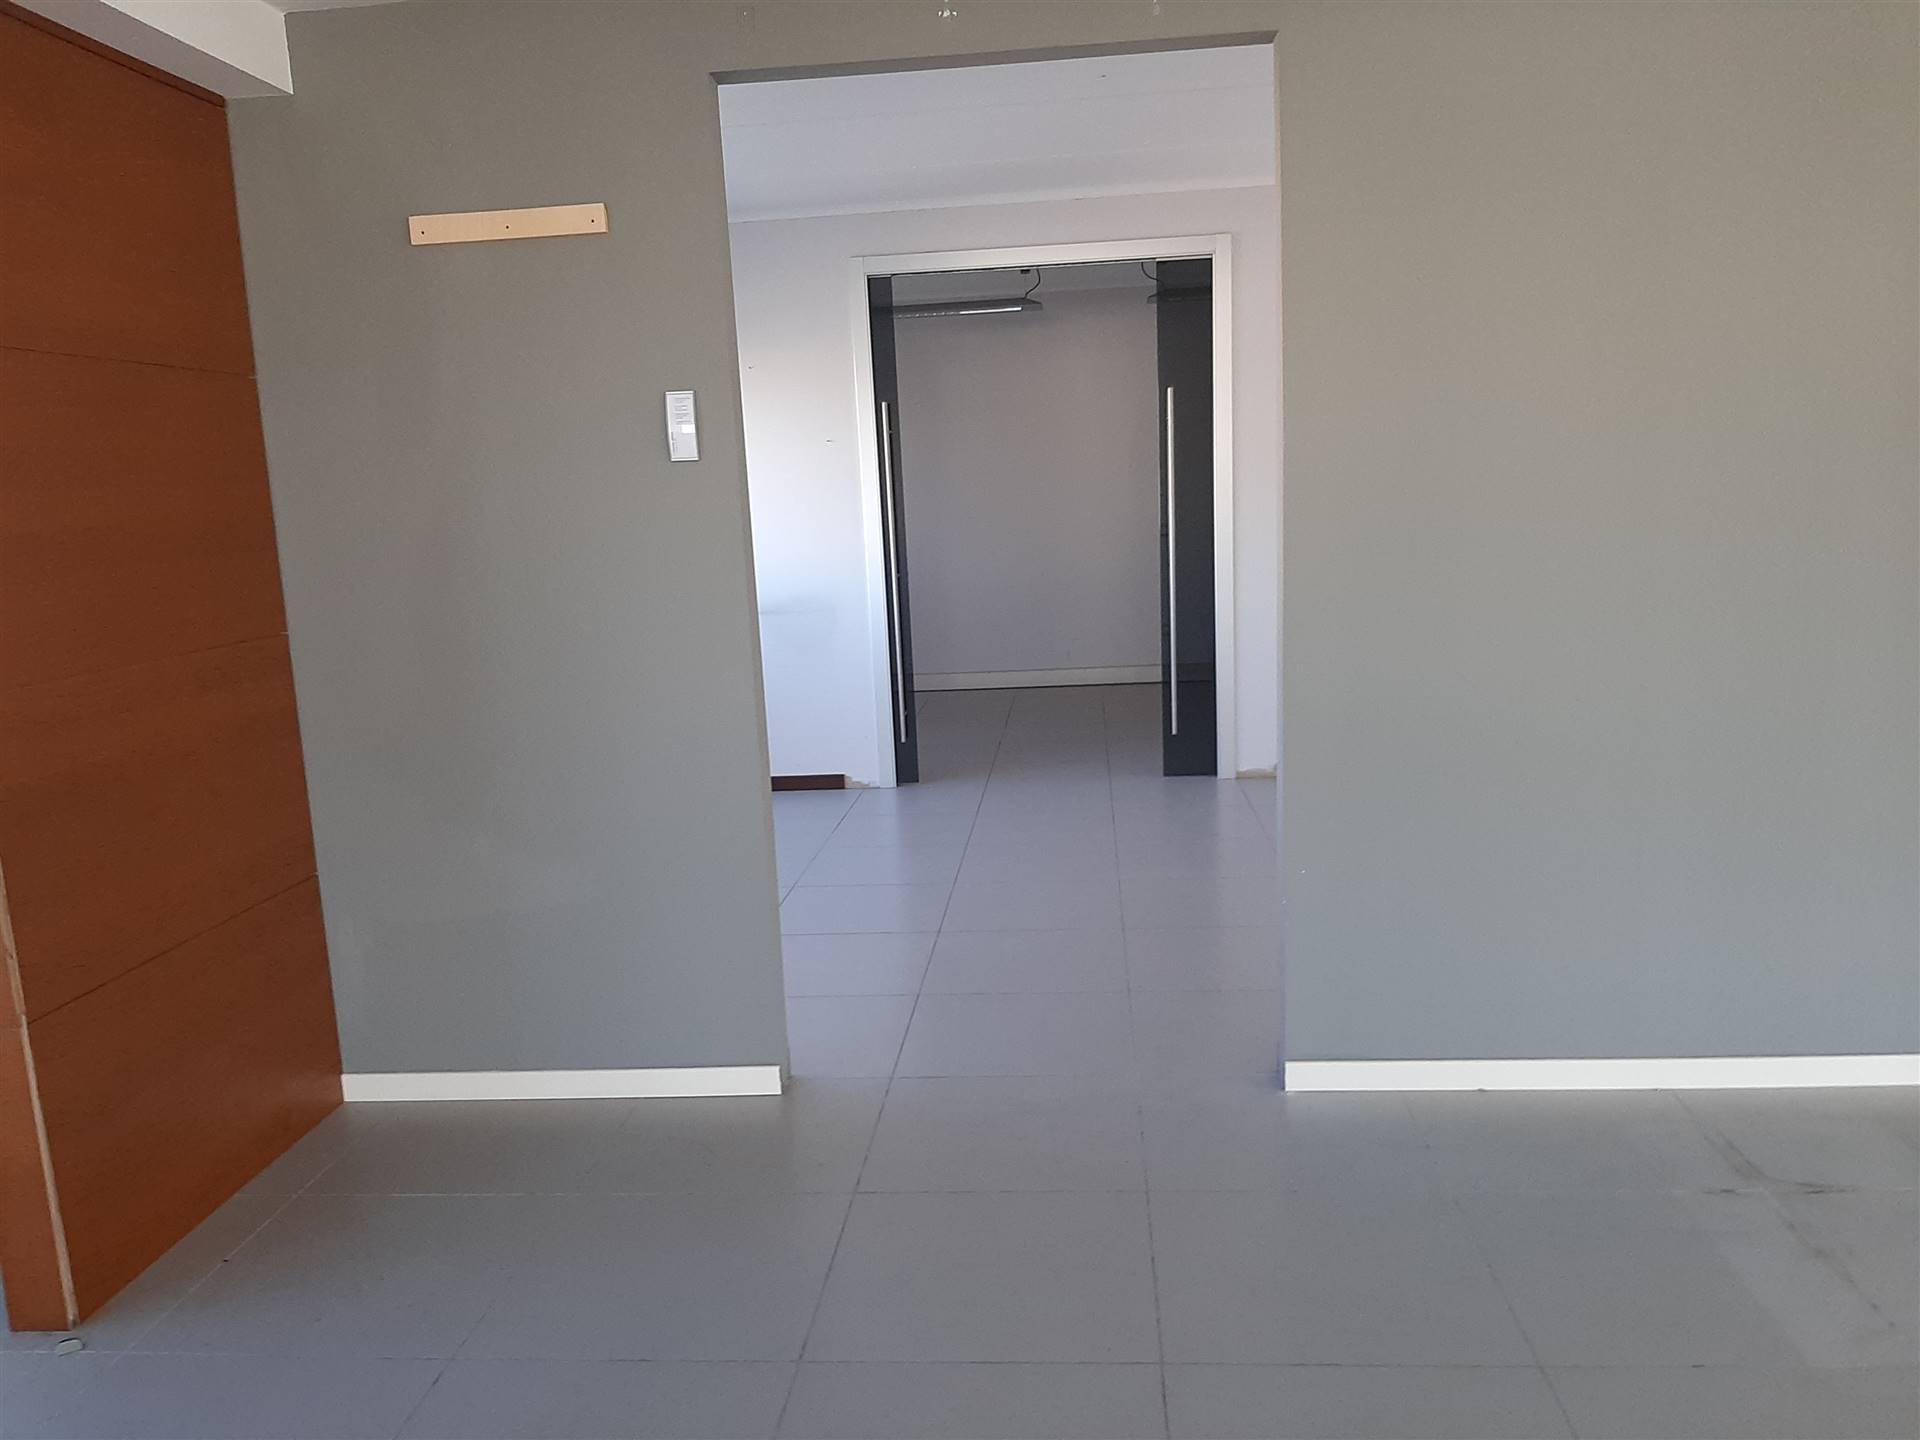 OSPEDALETTO, PISA, Office for sale of 250 Sq. mt., Energetic class: G, Epi: 6,8 kwh/m3 year, placed at 2° on 3, composed by: 11 Rooms, 2 Bathrooms, 